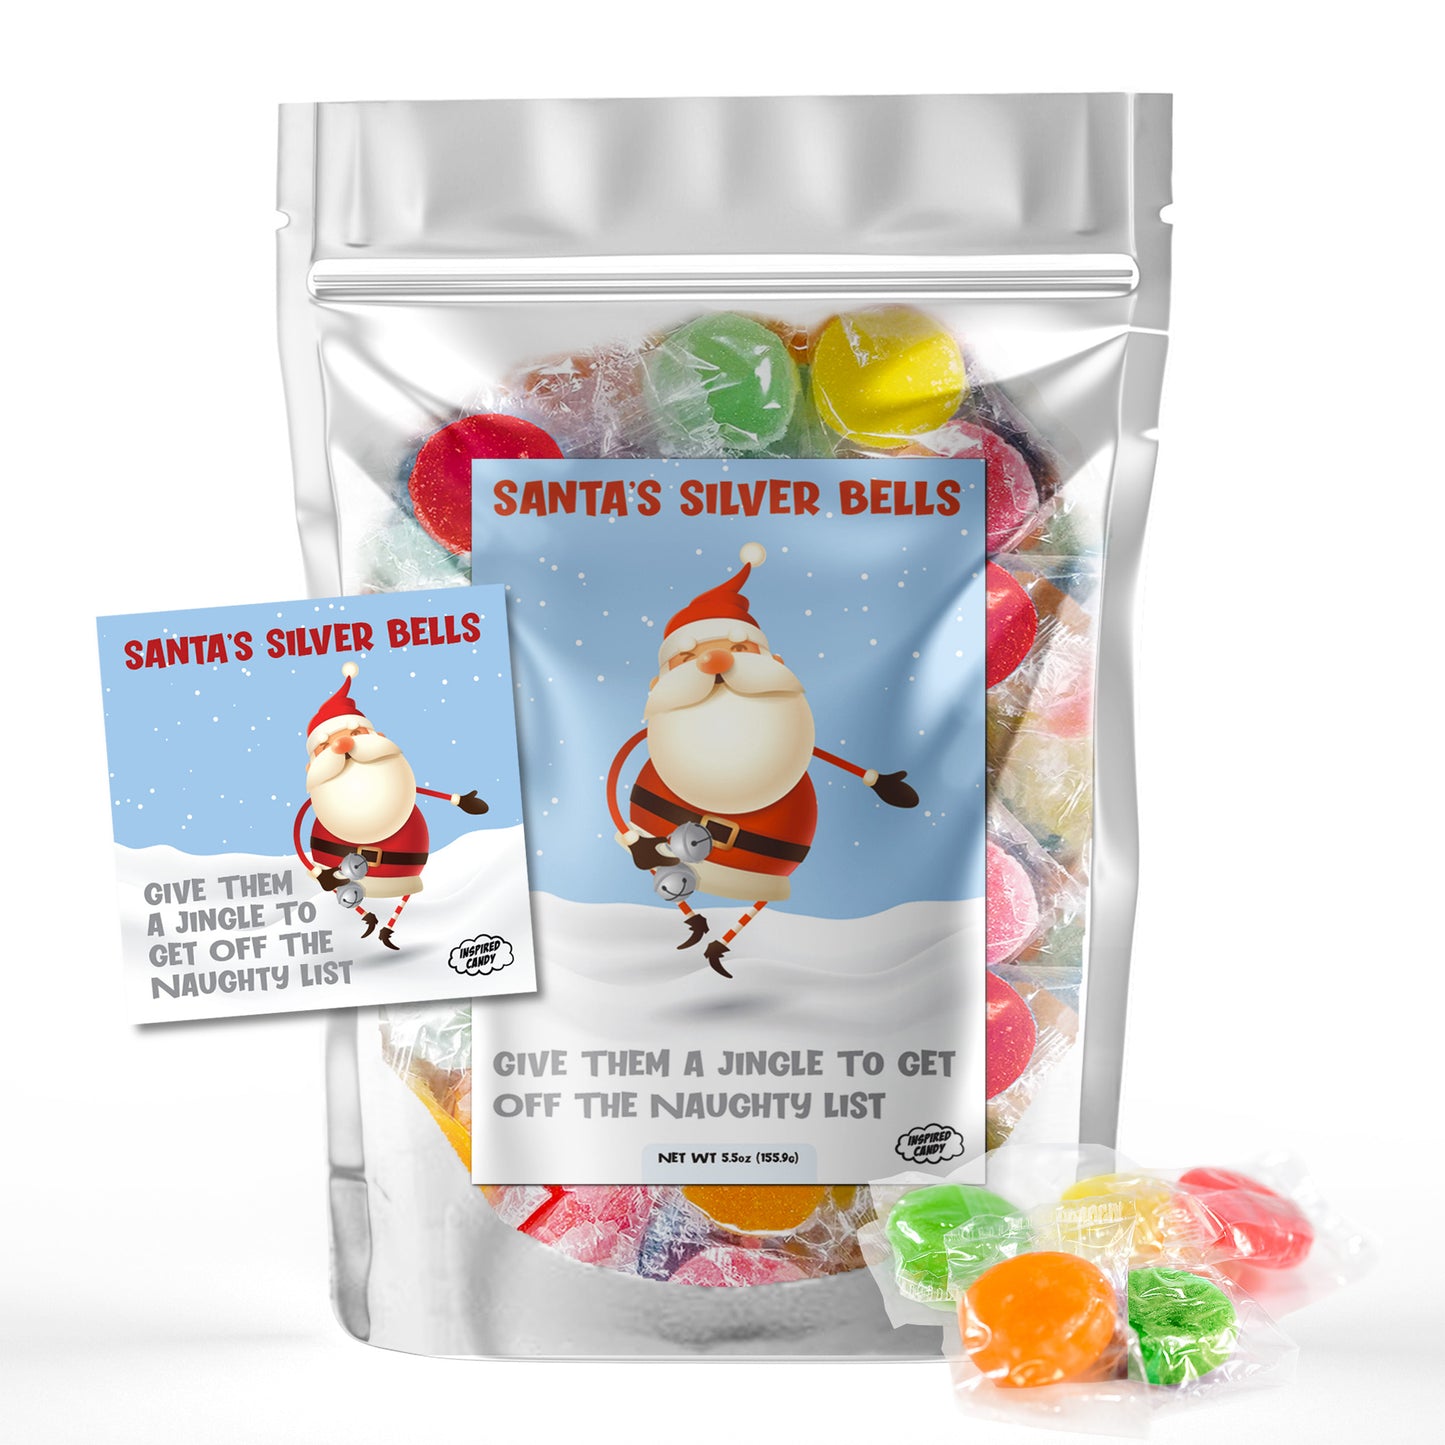  Santa's Silver Bells, Give Them A Jingle To Get Off The  Naughty List- Stocking Stuffer Candy. 5.5oz Bag of Jelly Disks by Inspired  Candy. Unique Stocking Stuffers For Adults or